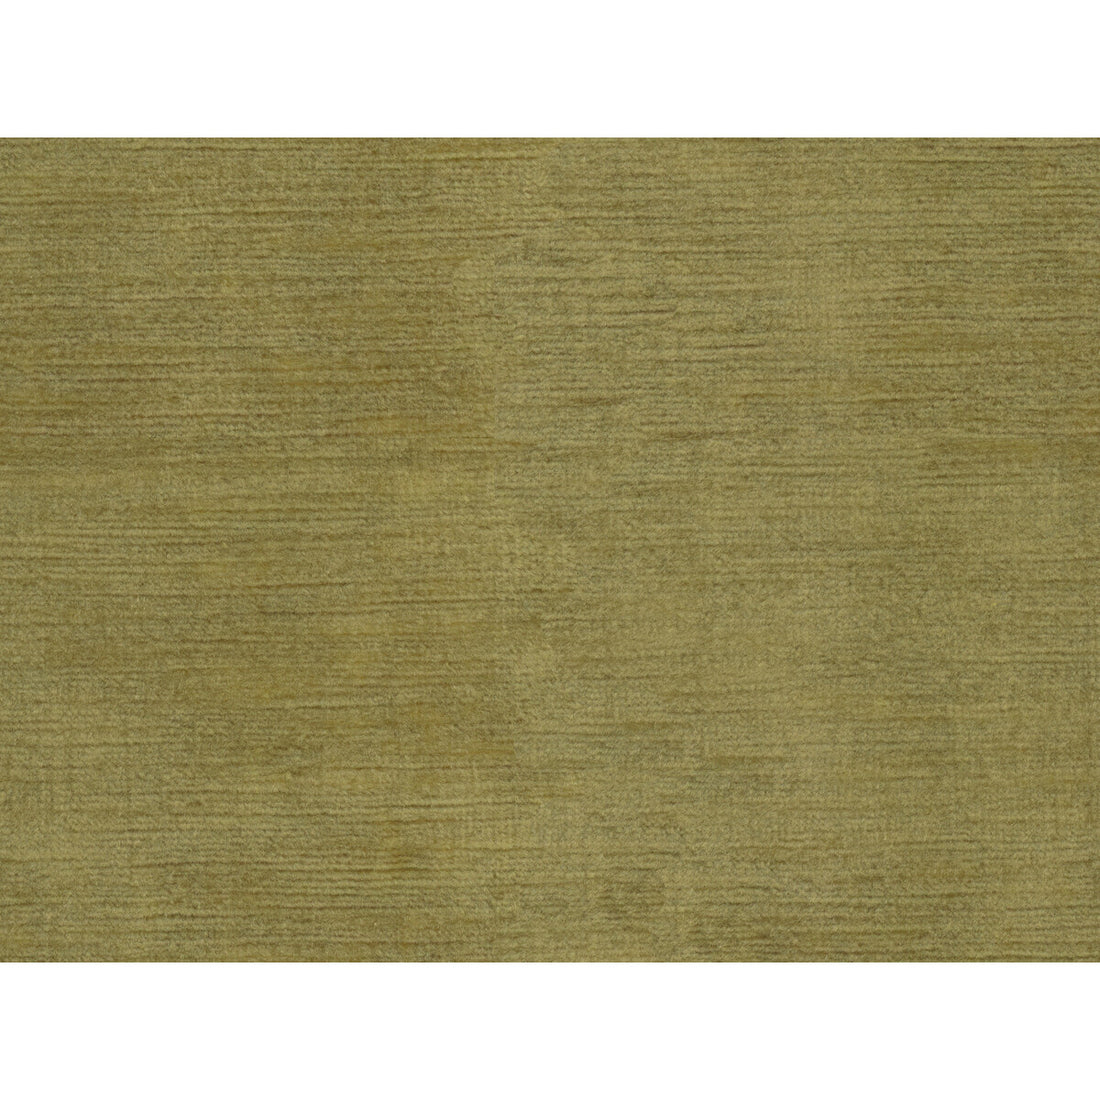 Fulham Linen V fabric in gold olive color - pattern 2016133.163.0 - by Lee Jofa